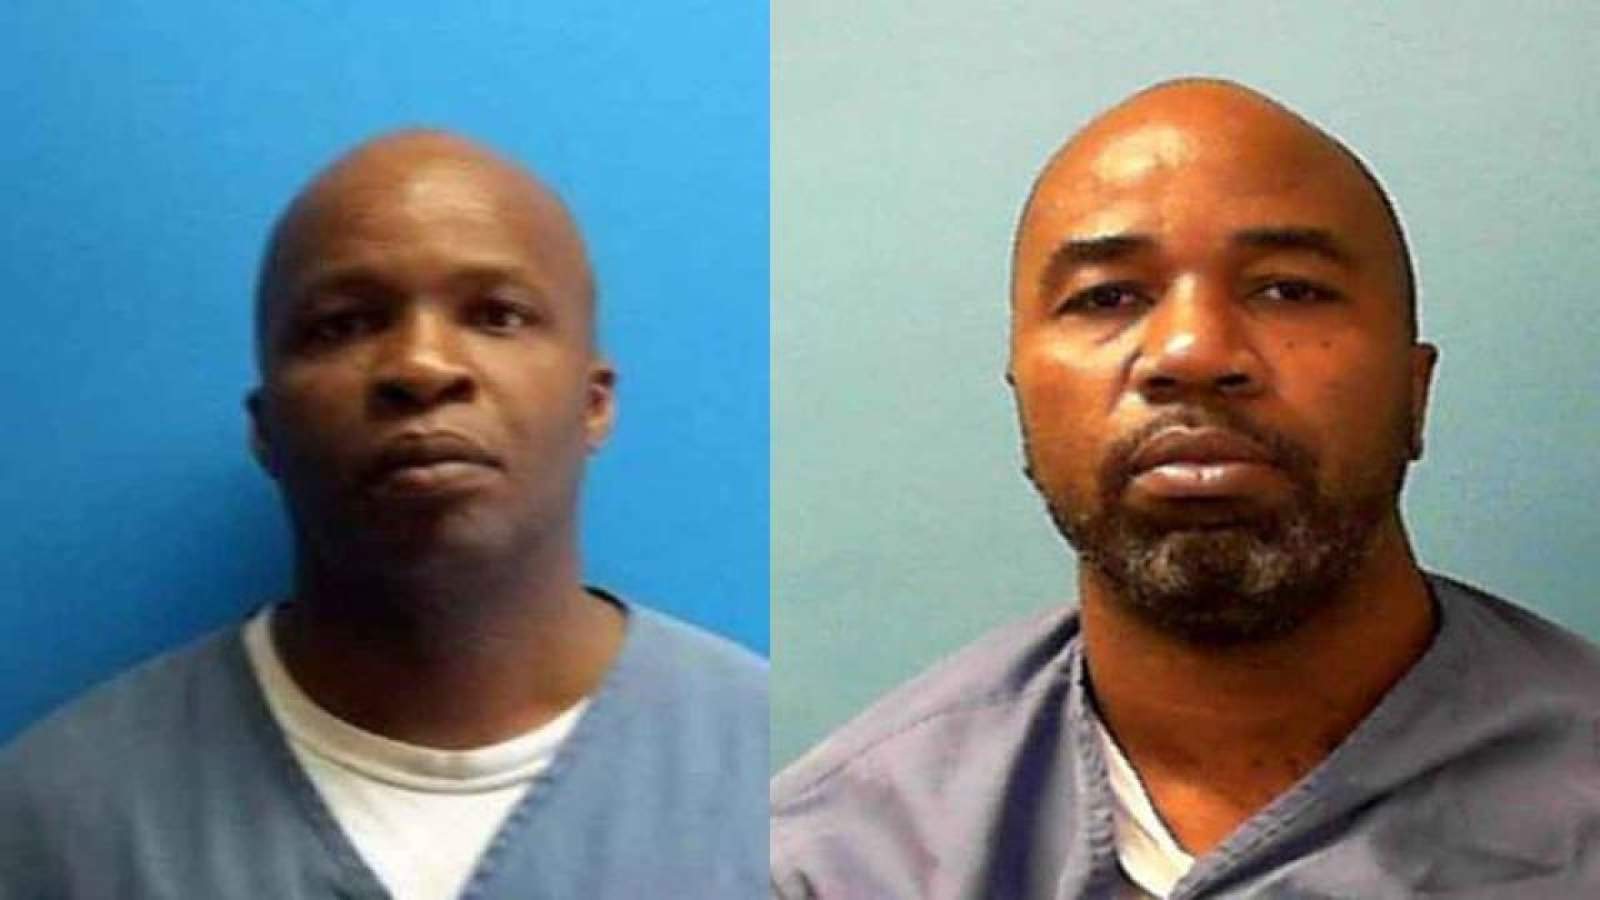 Suspects killed in police shootout identified by law enforcement